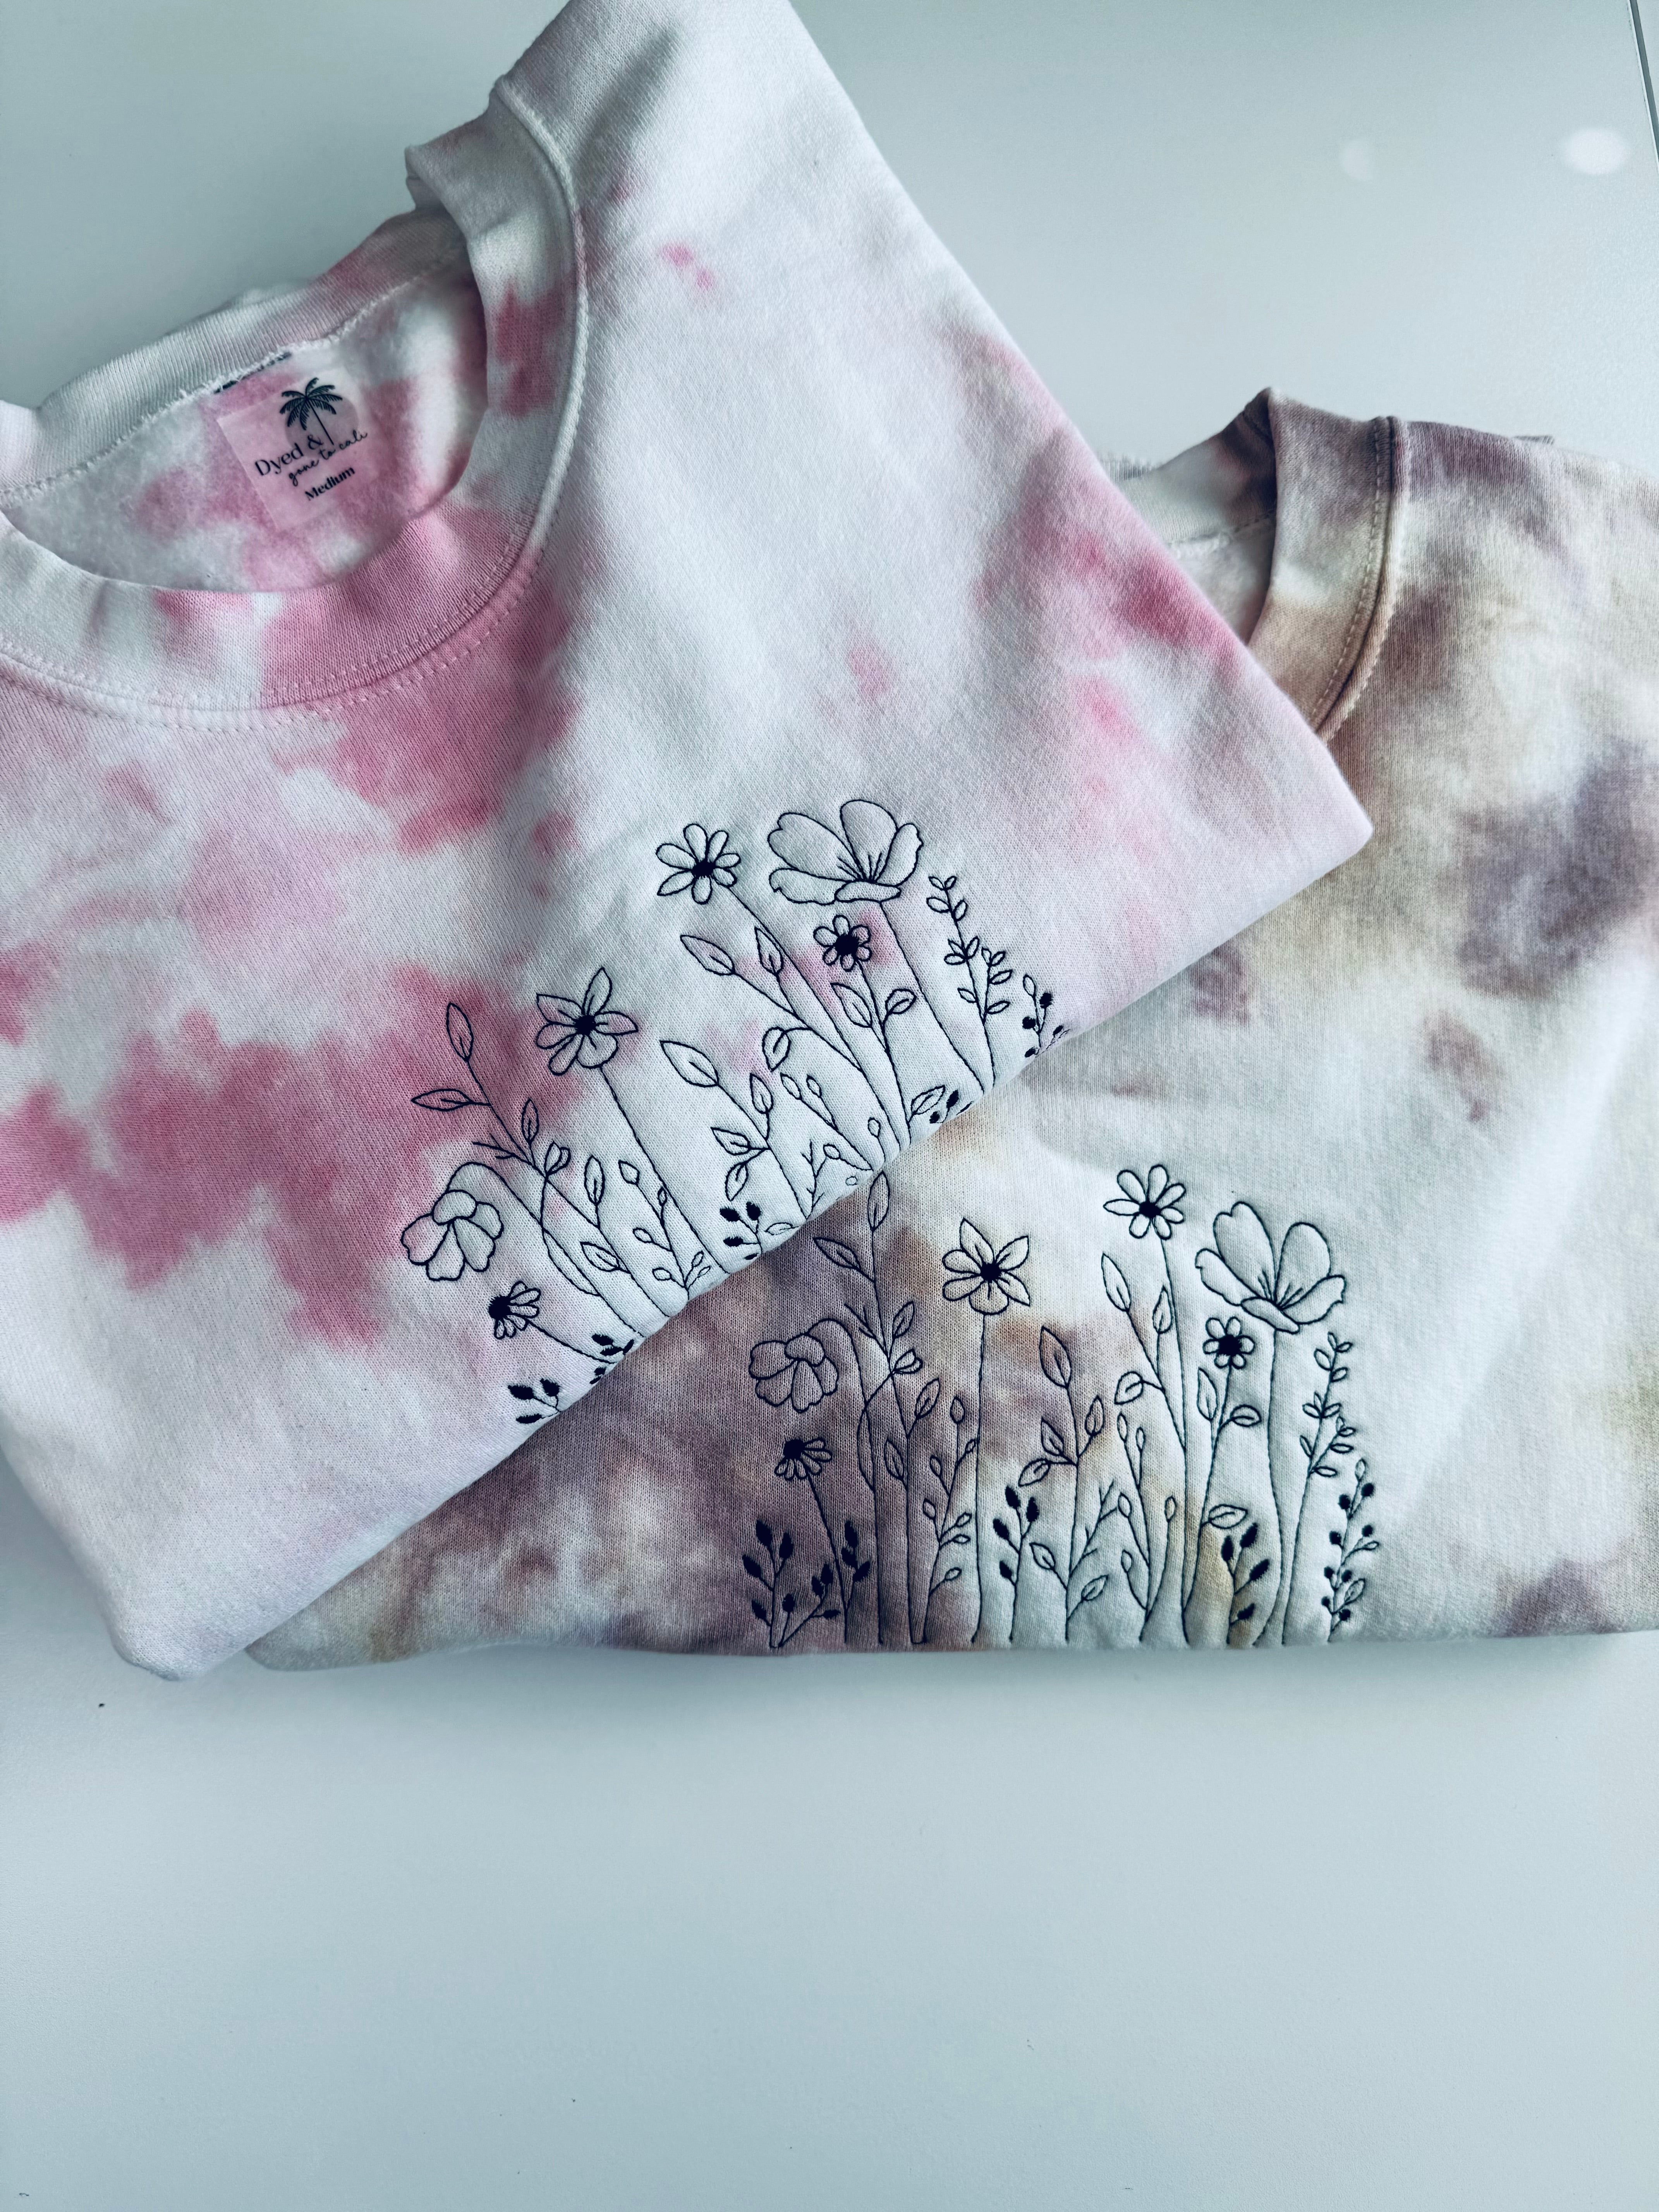 Pink Dyed Floral Embroidery Crew